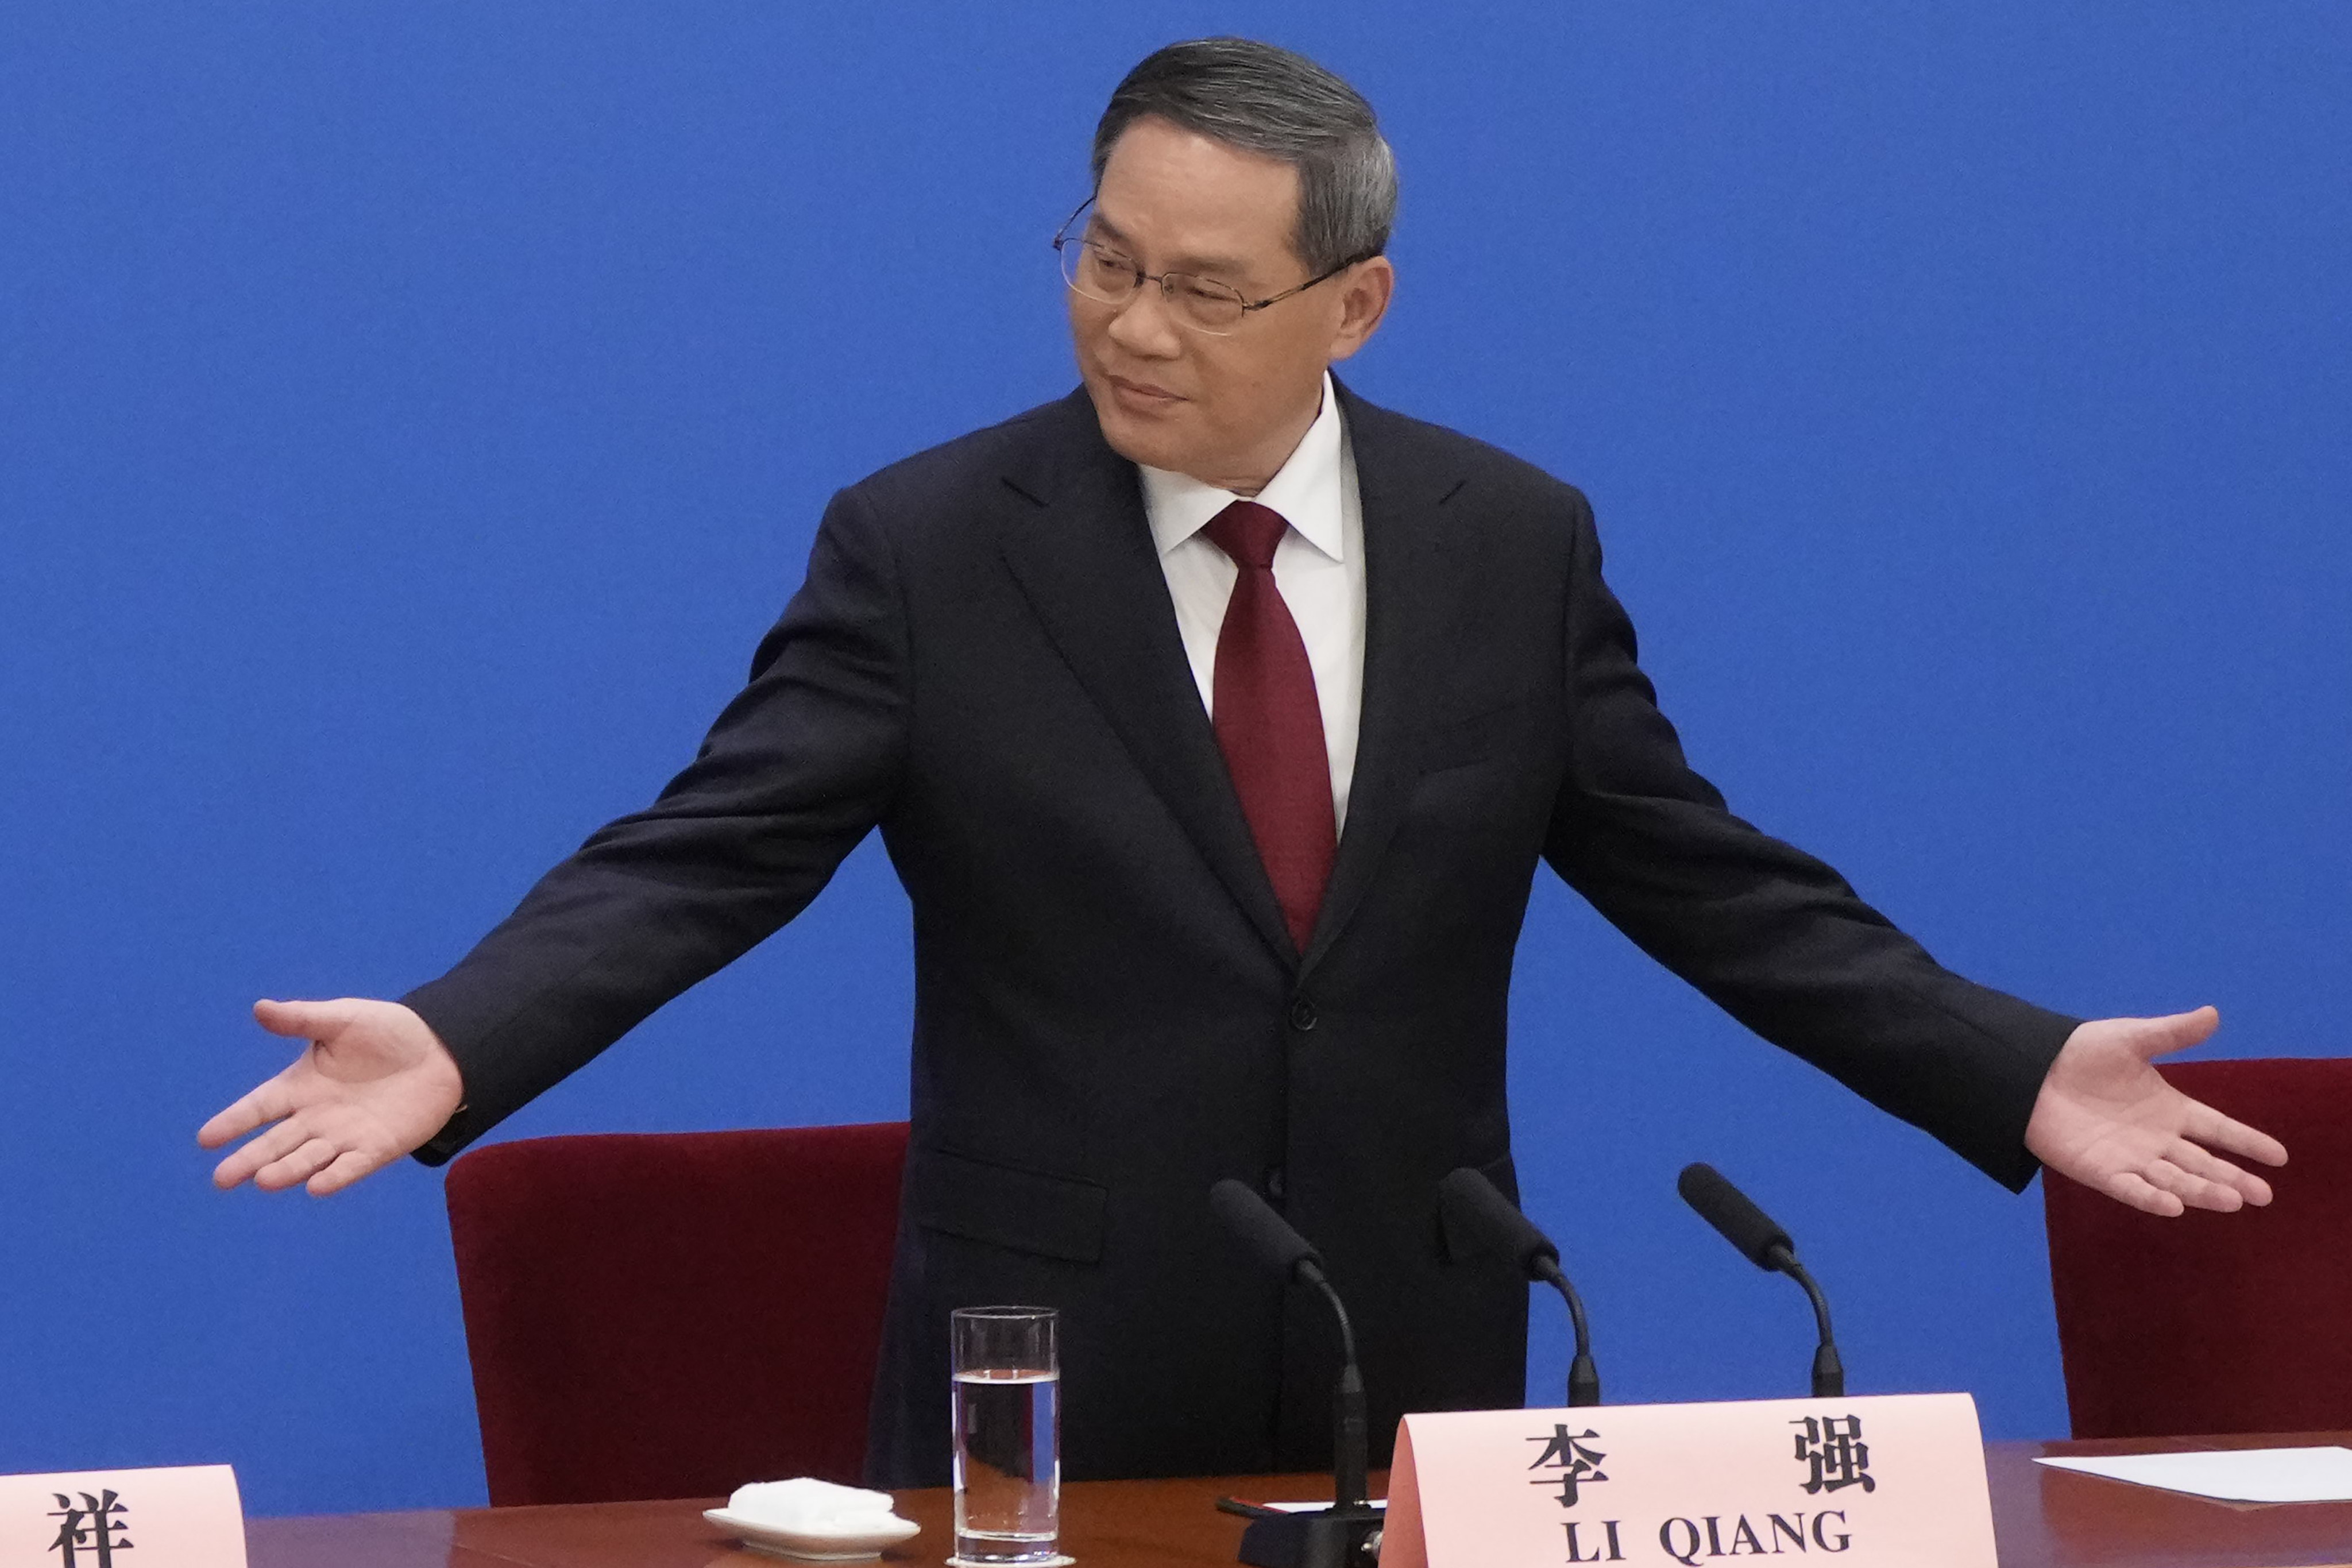 Premier Li Qiang will deliver the government work report on Tuesday but will not hold a press conference at the end of the “two sessions”. Photo: AP